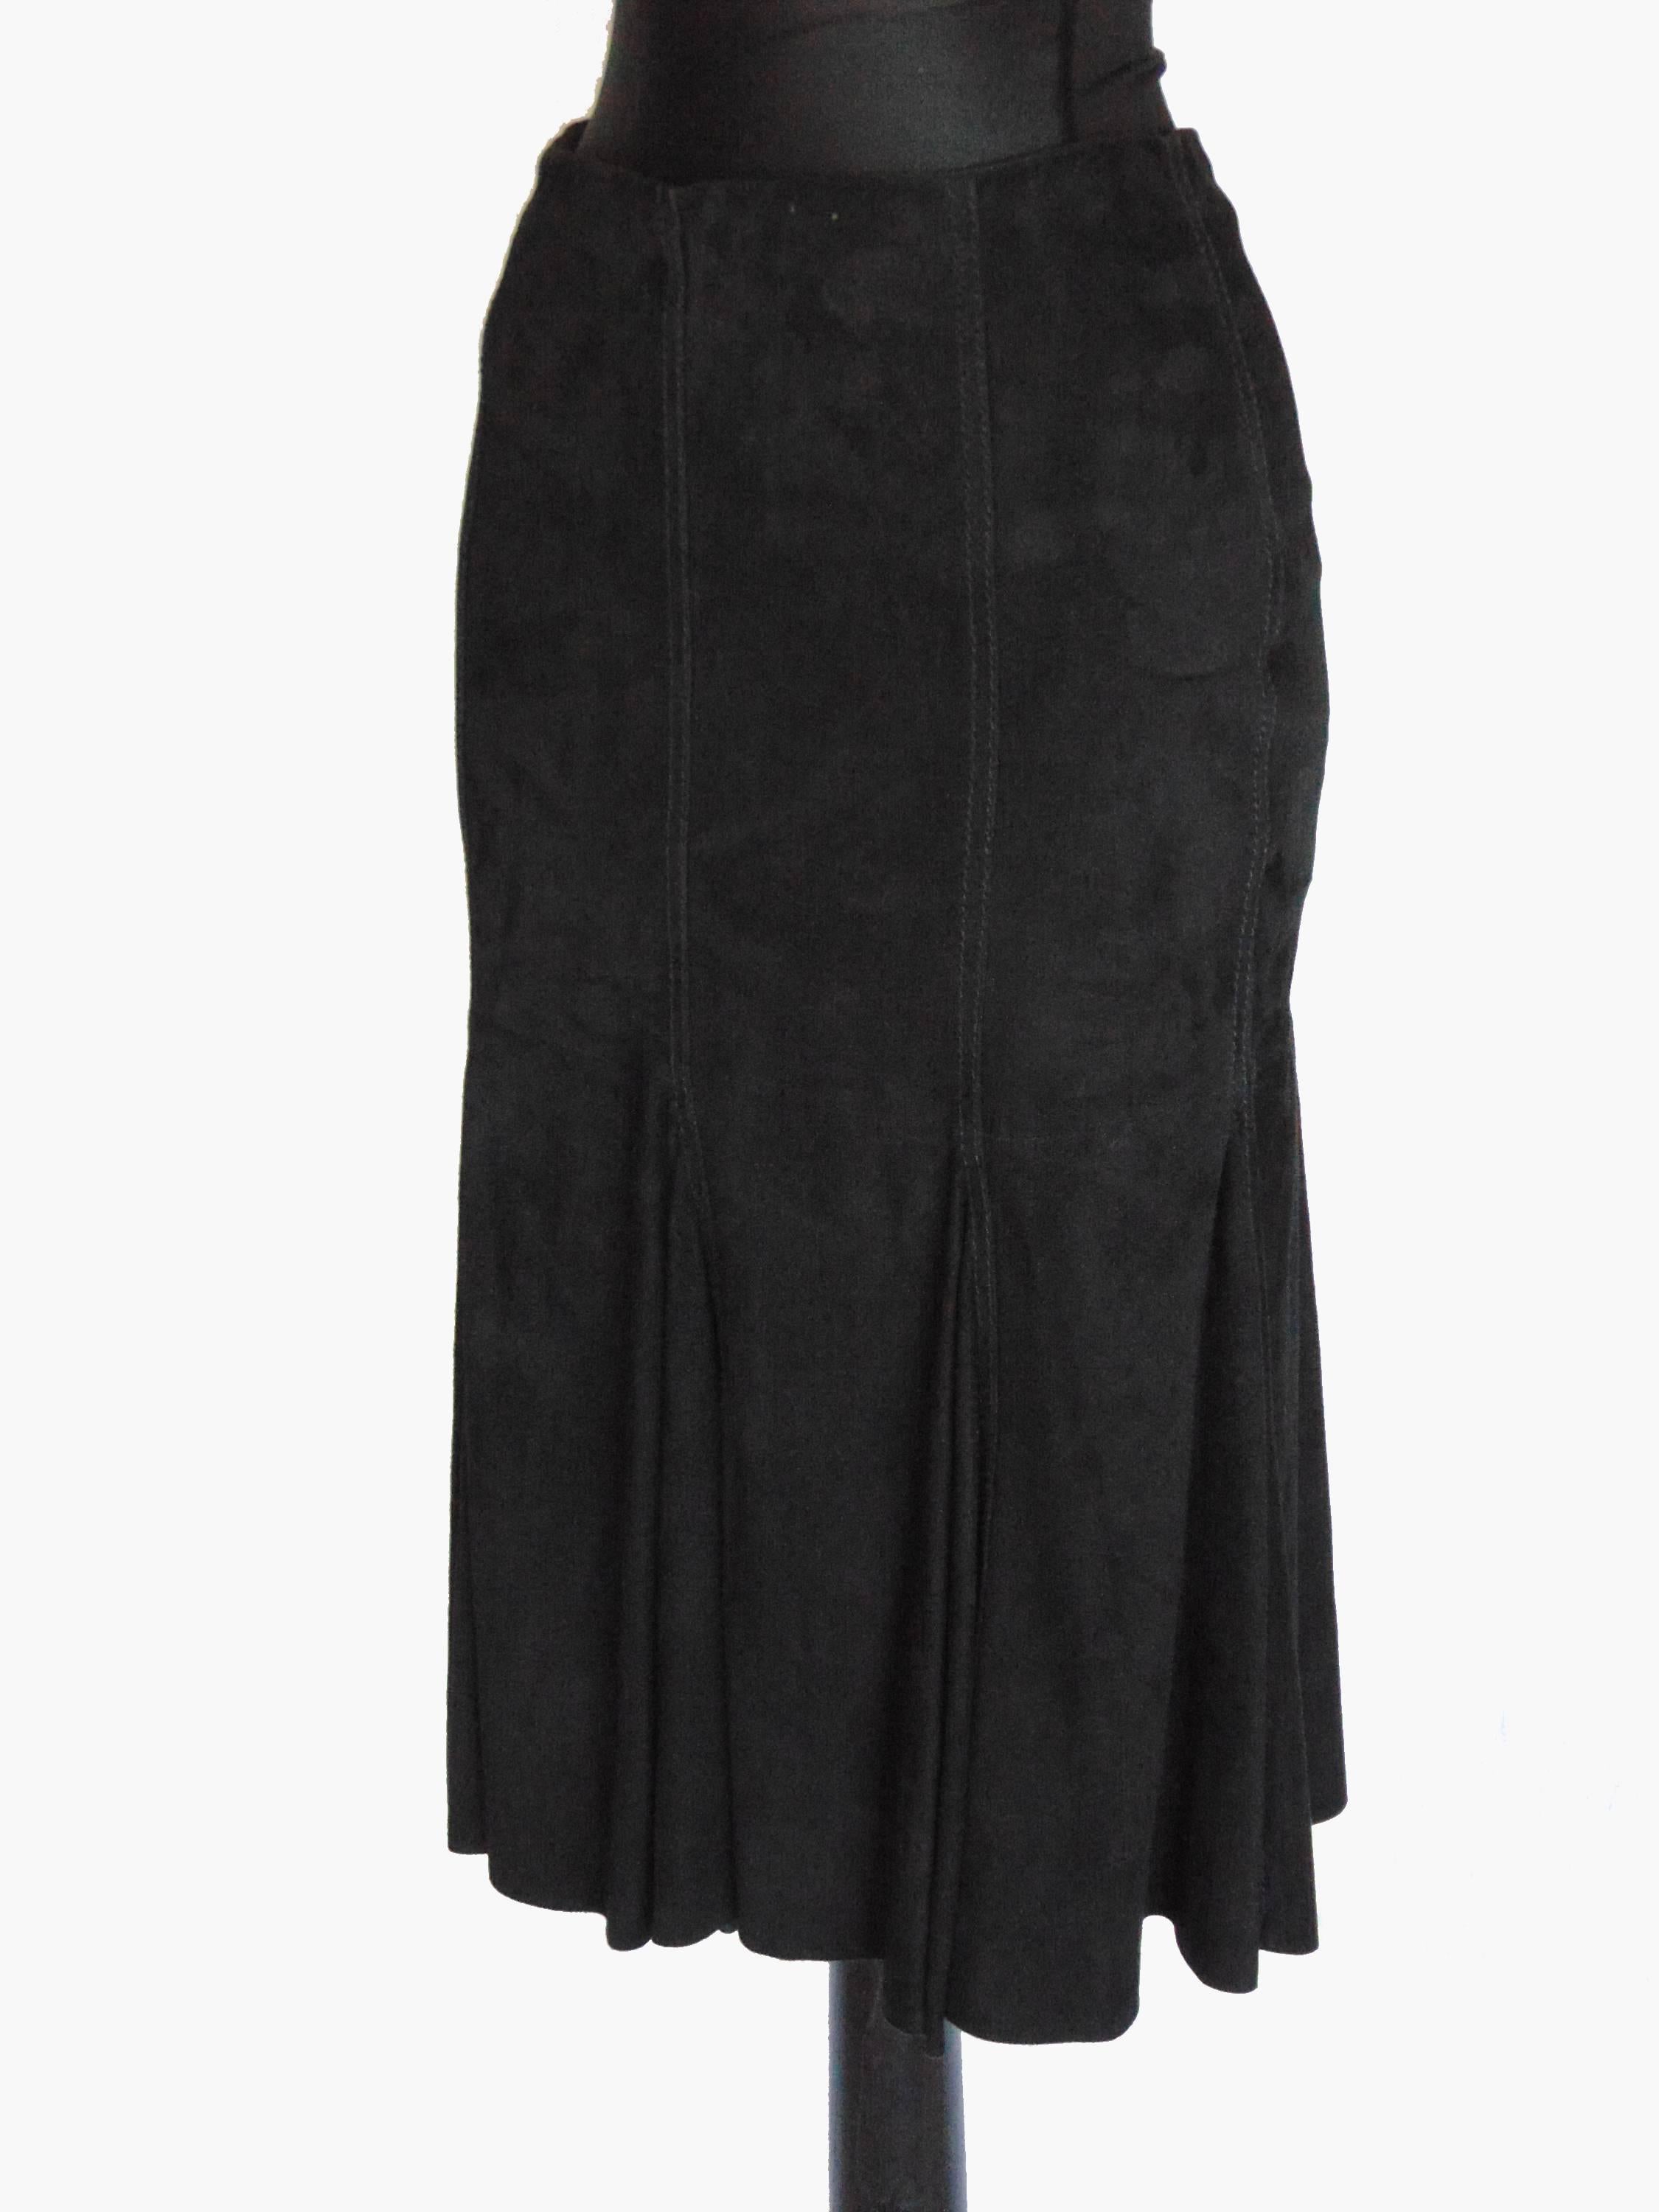 This fabulous suede leather skirt was made by Genny Italy in the 1990s.  Made from the most supple black suede leather, it's partially lined and fastens with a zipper.  The cut is designed to show off your curves and make your bottom look downright